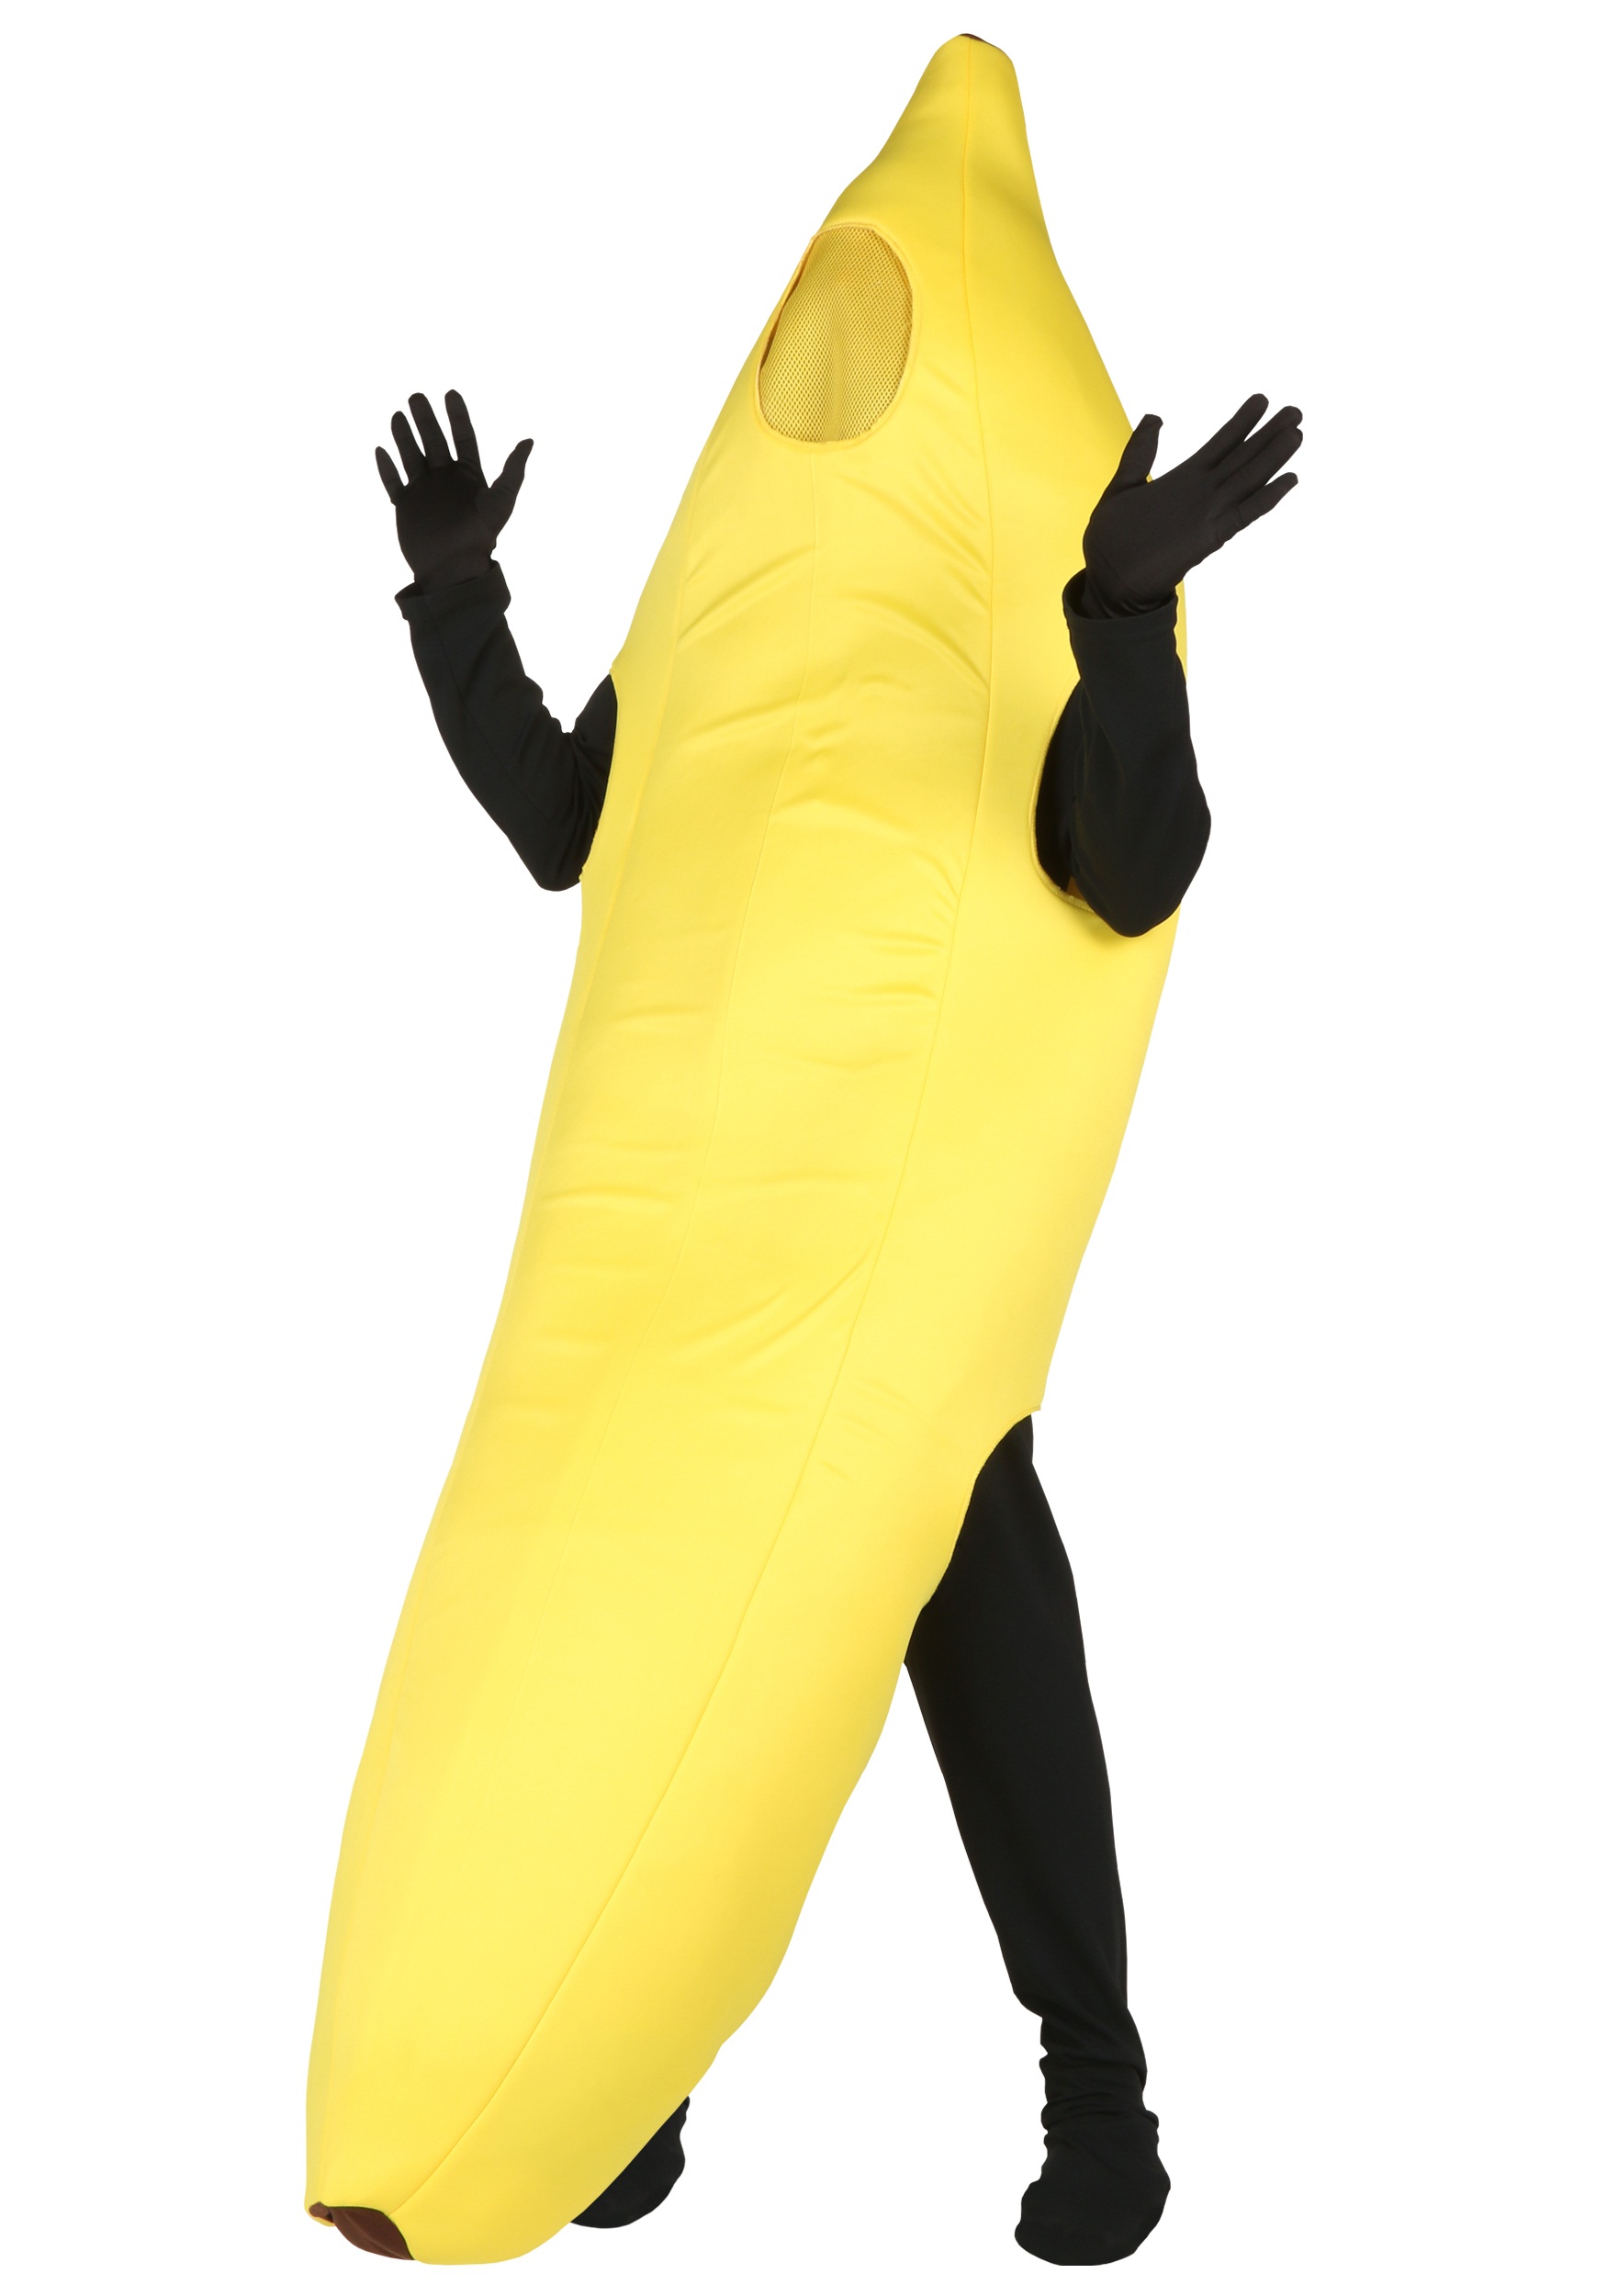 This Adult Supreme Banana Costume is a fantastic costume for gorillas and h...